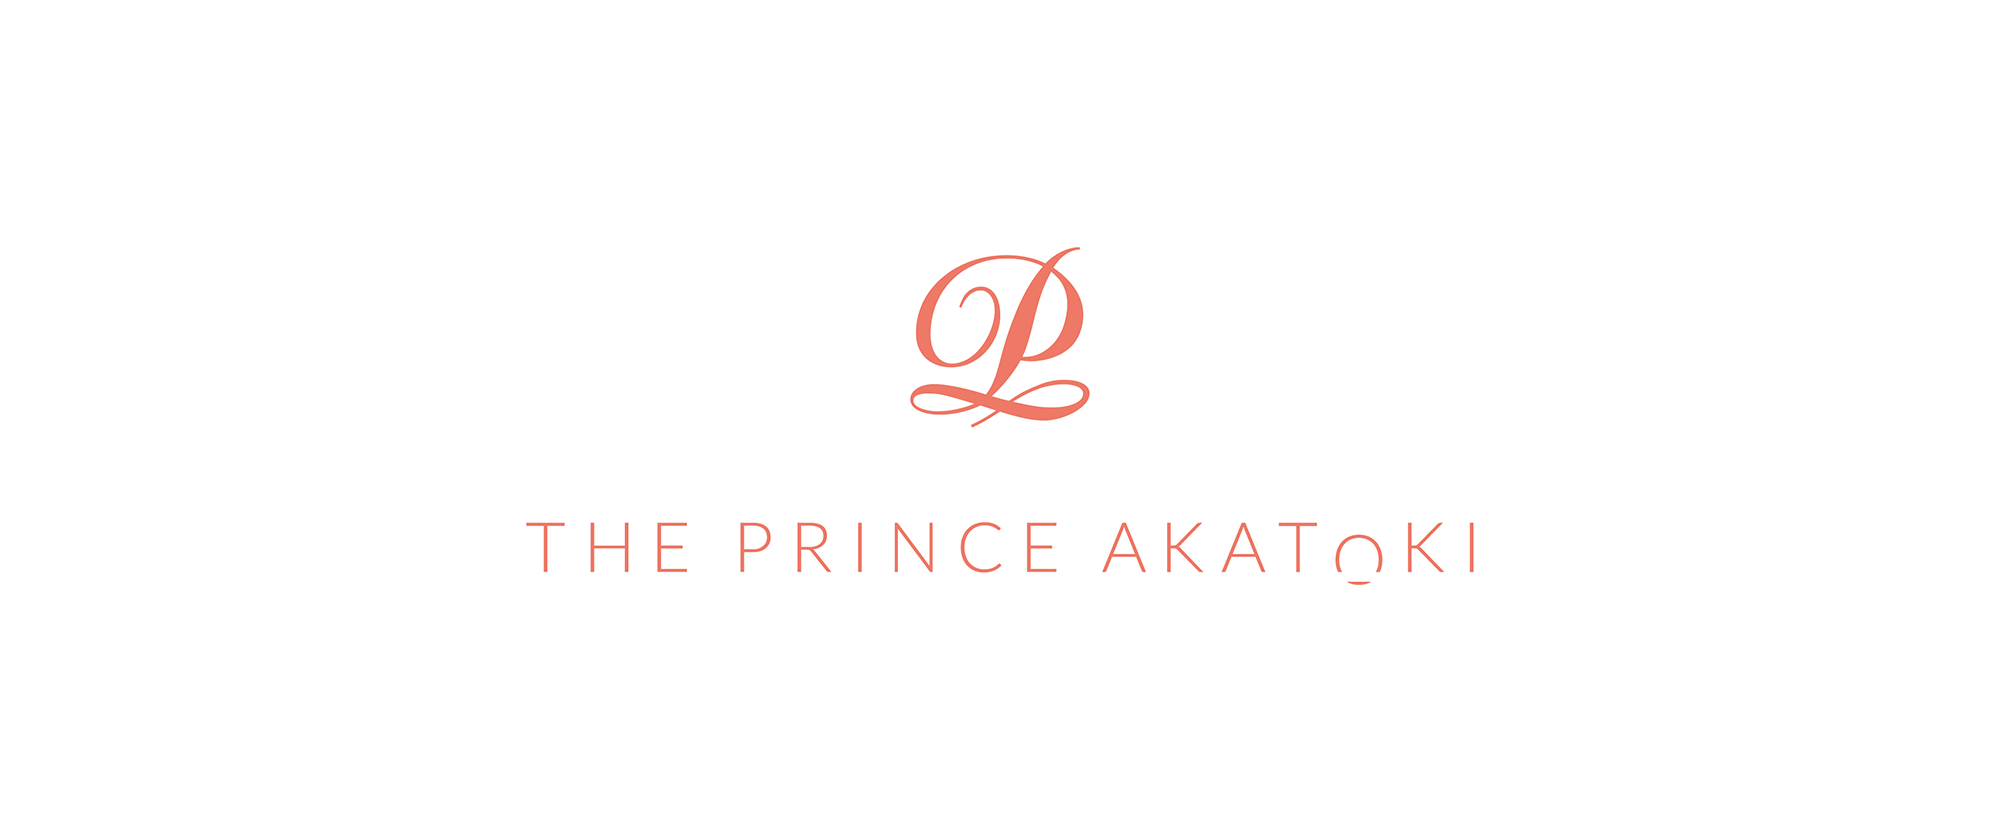 New Logo and Identity for The Prince Akatoki by Interbrand